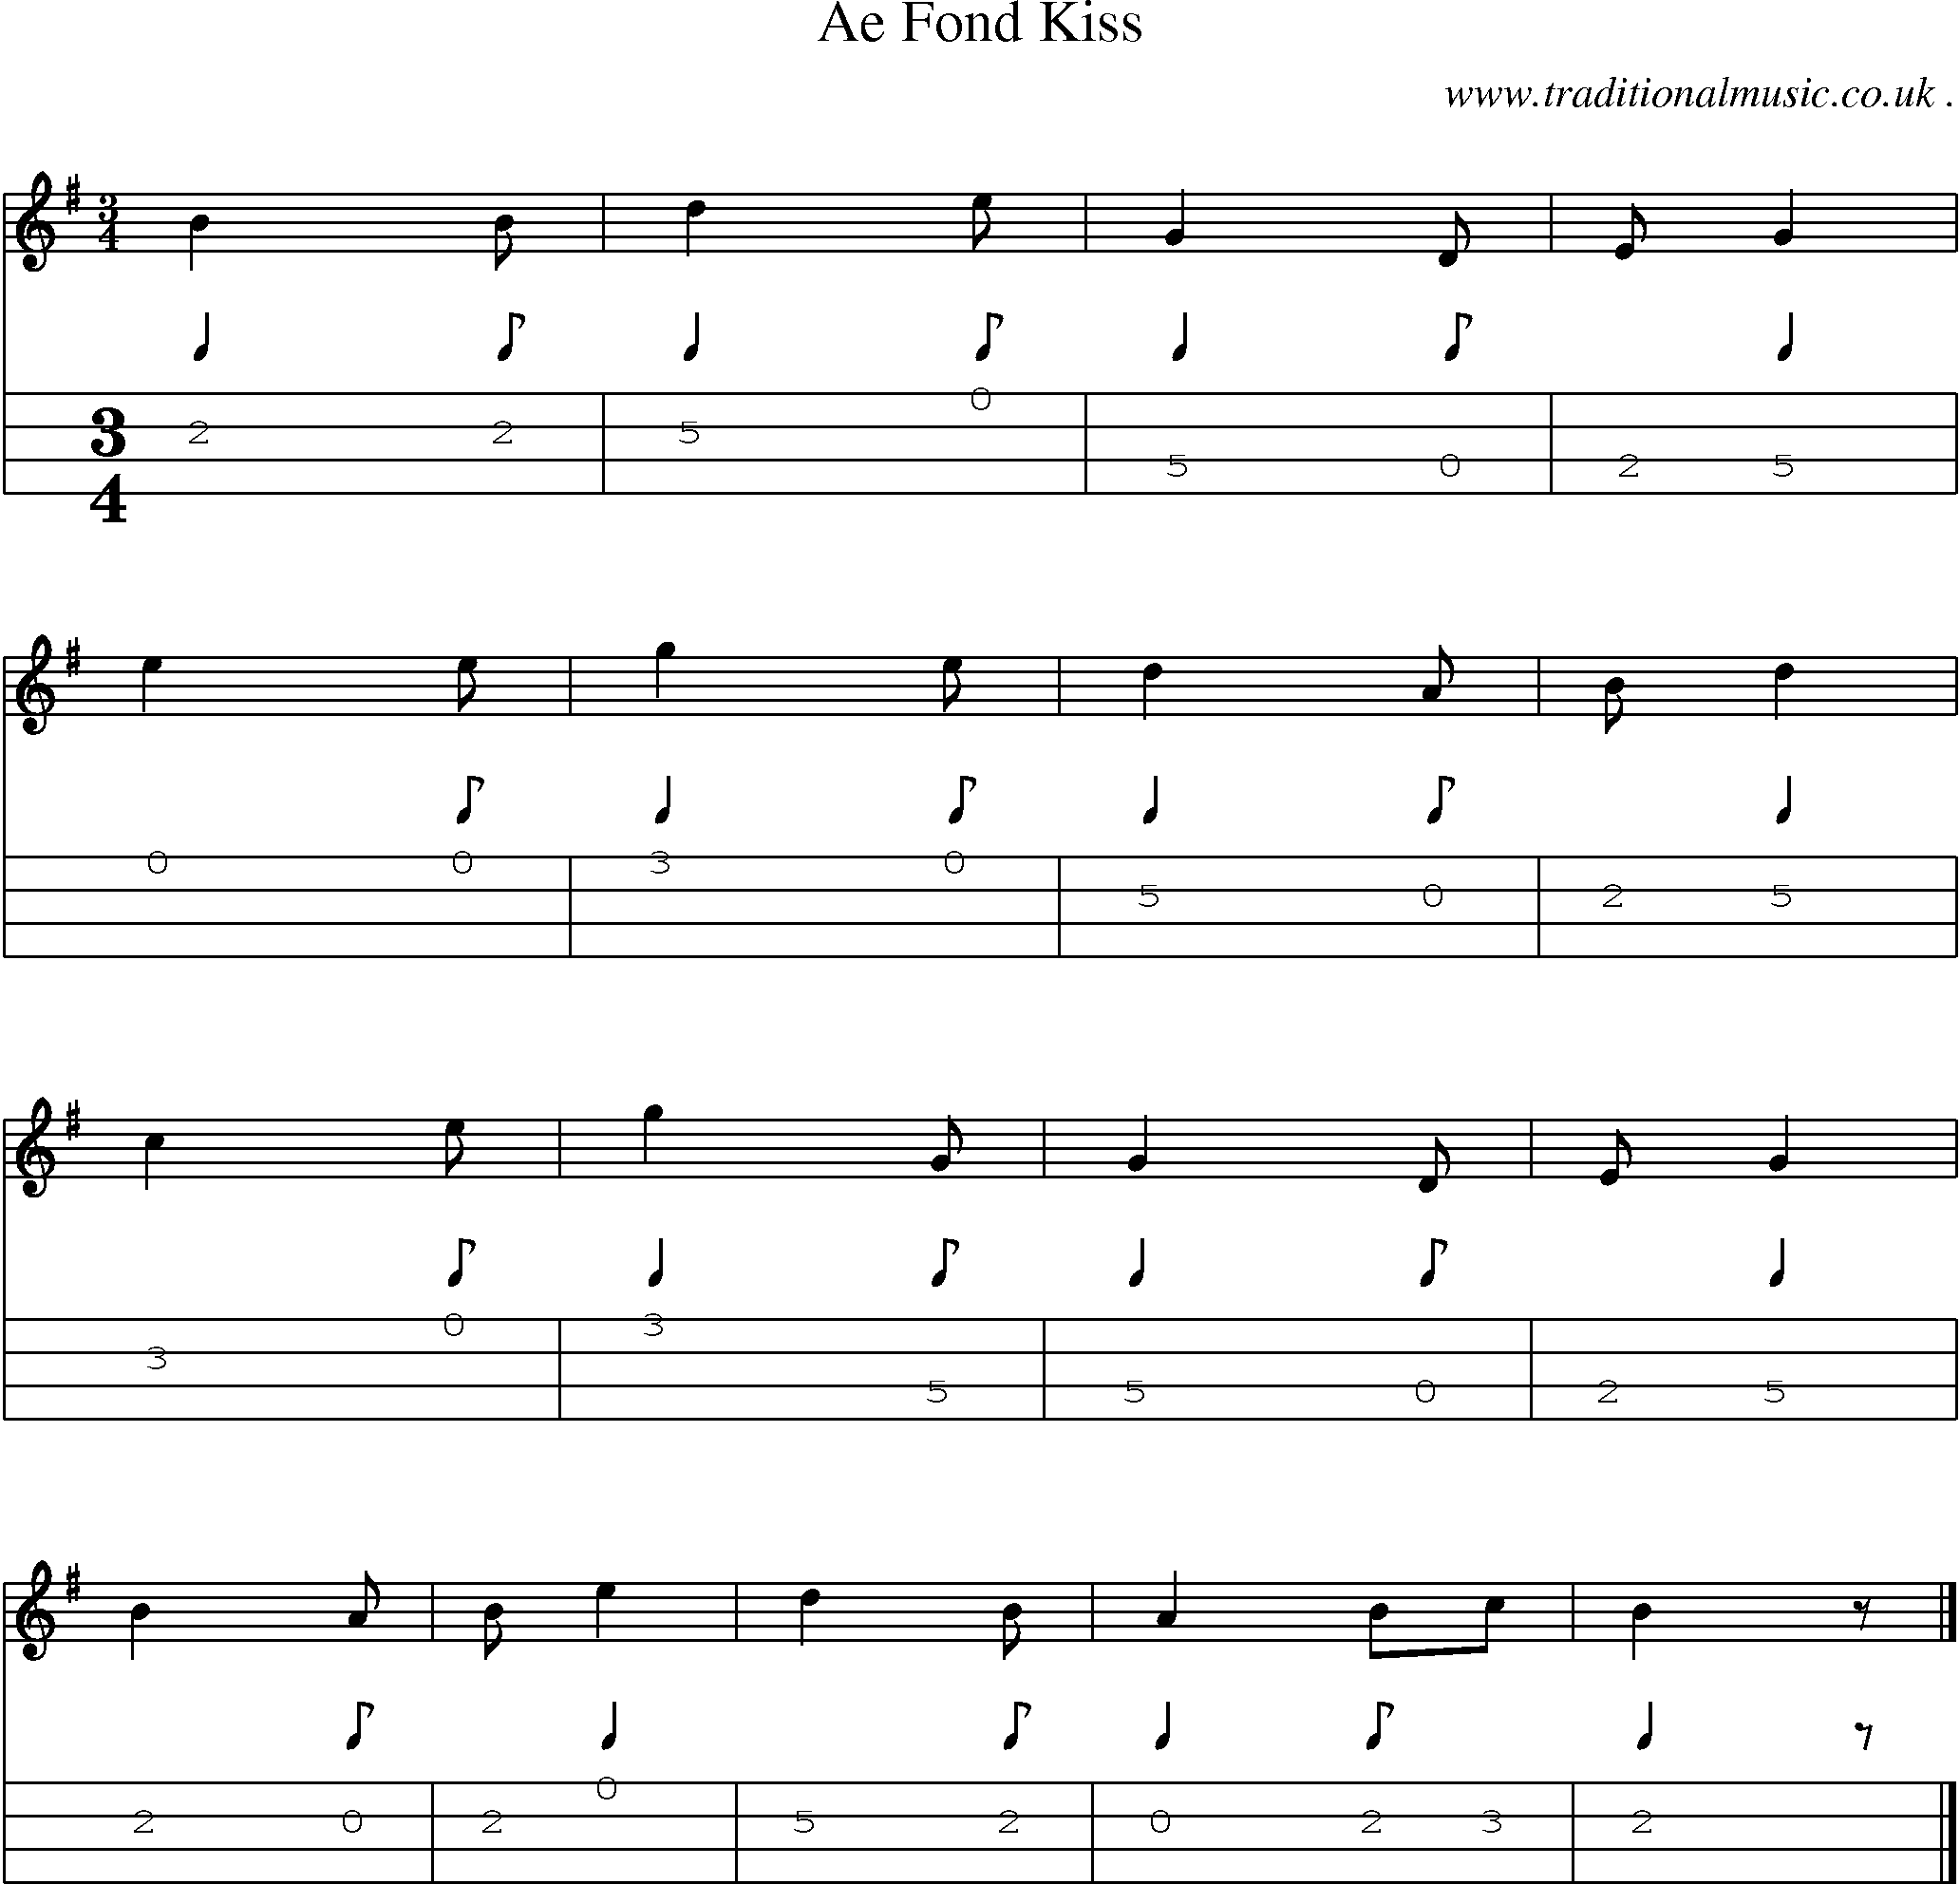 Sheet-music  score, Chords and Mandolin Tabs for Ae Fond Kiss